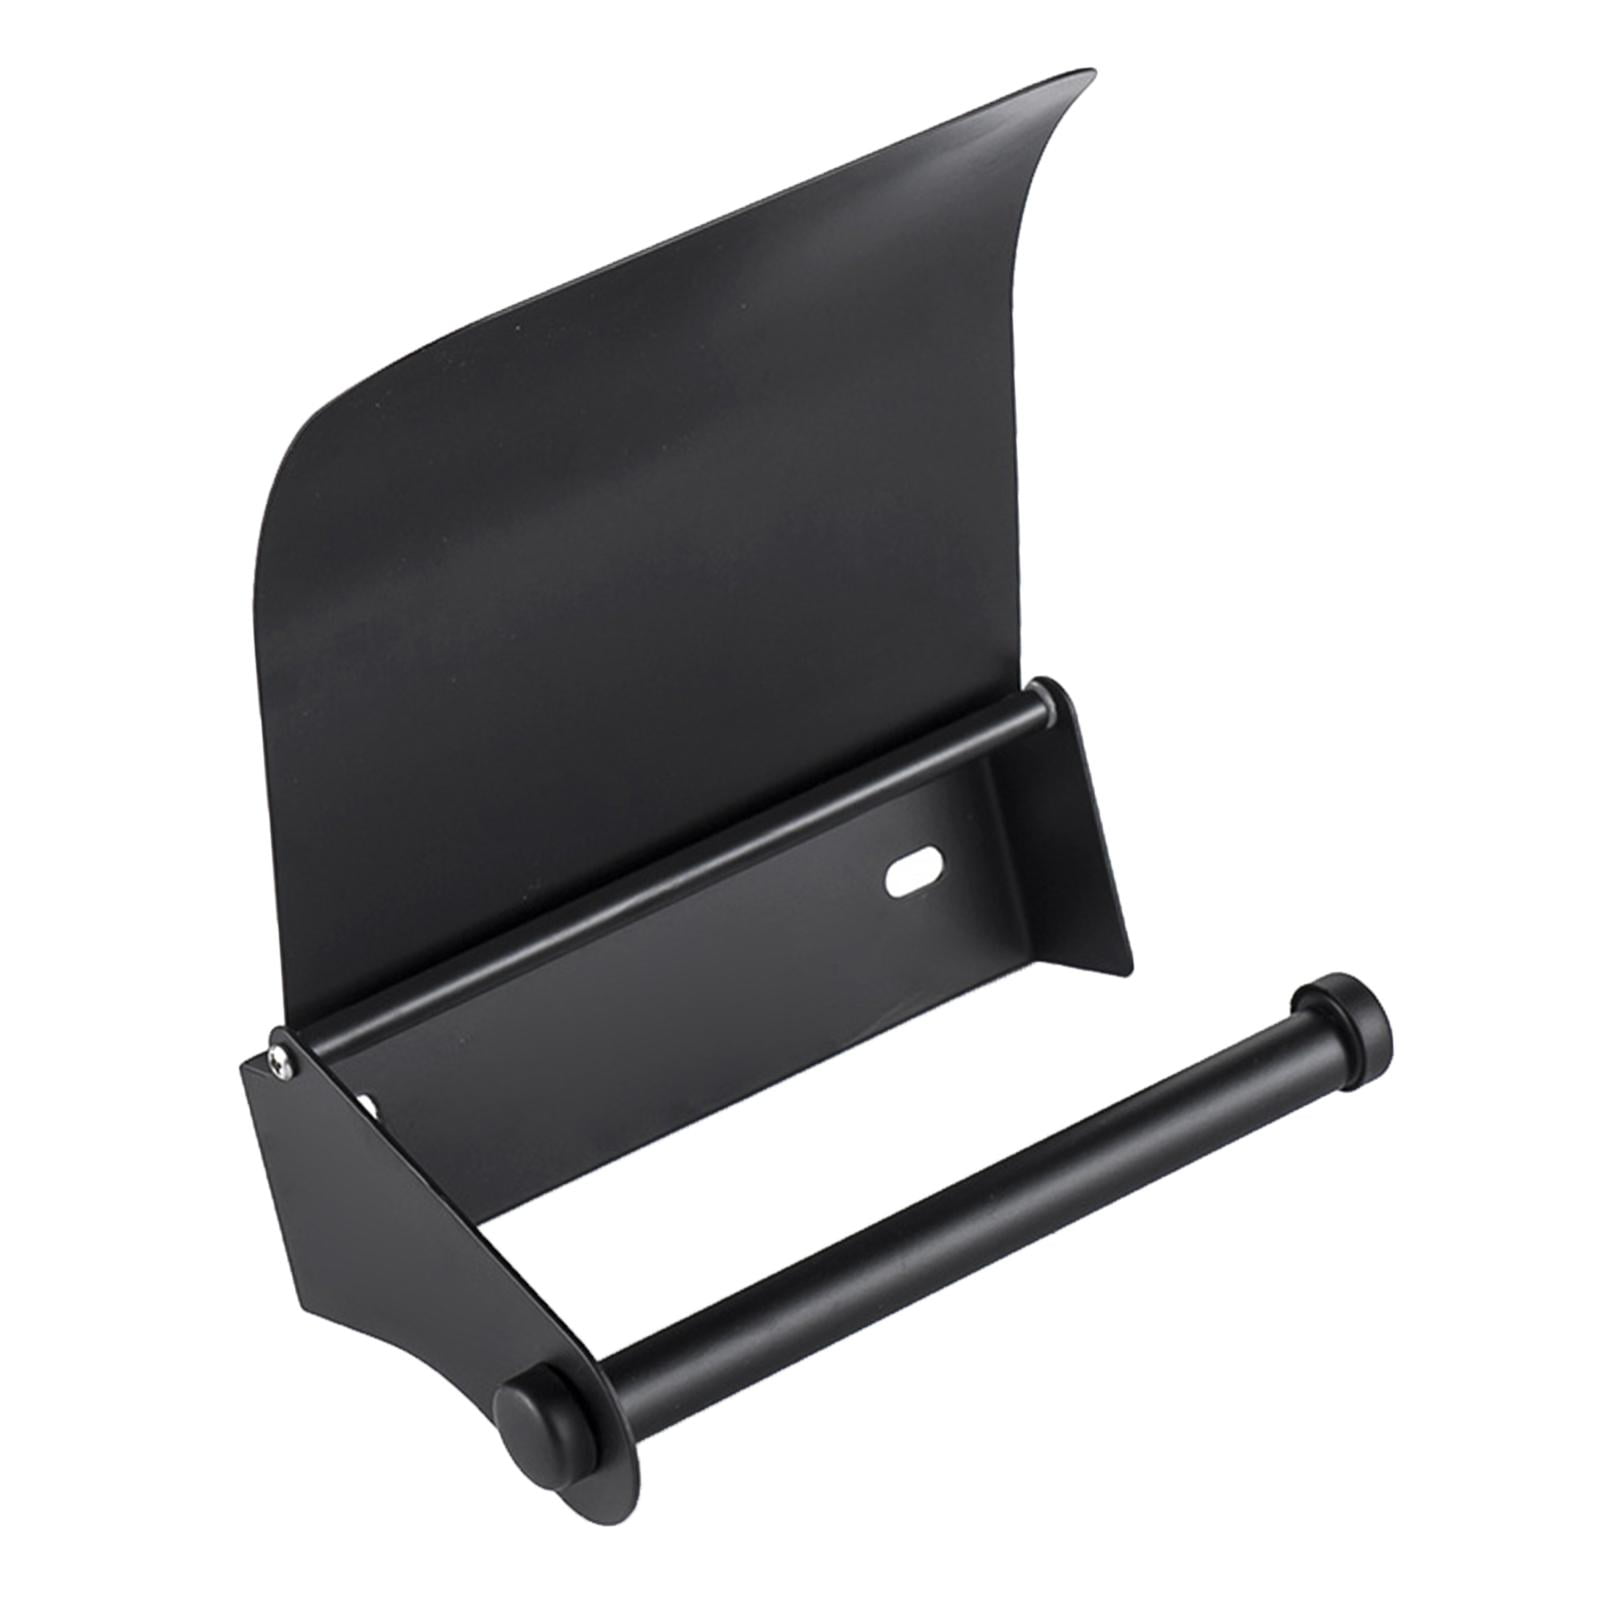 Gpoty Wall-mounted Toilet Paper Holder with Shelf,Black Toilet